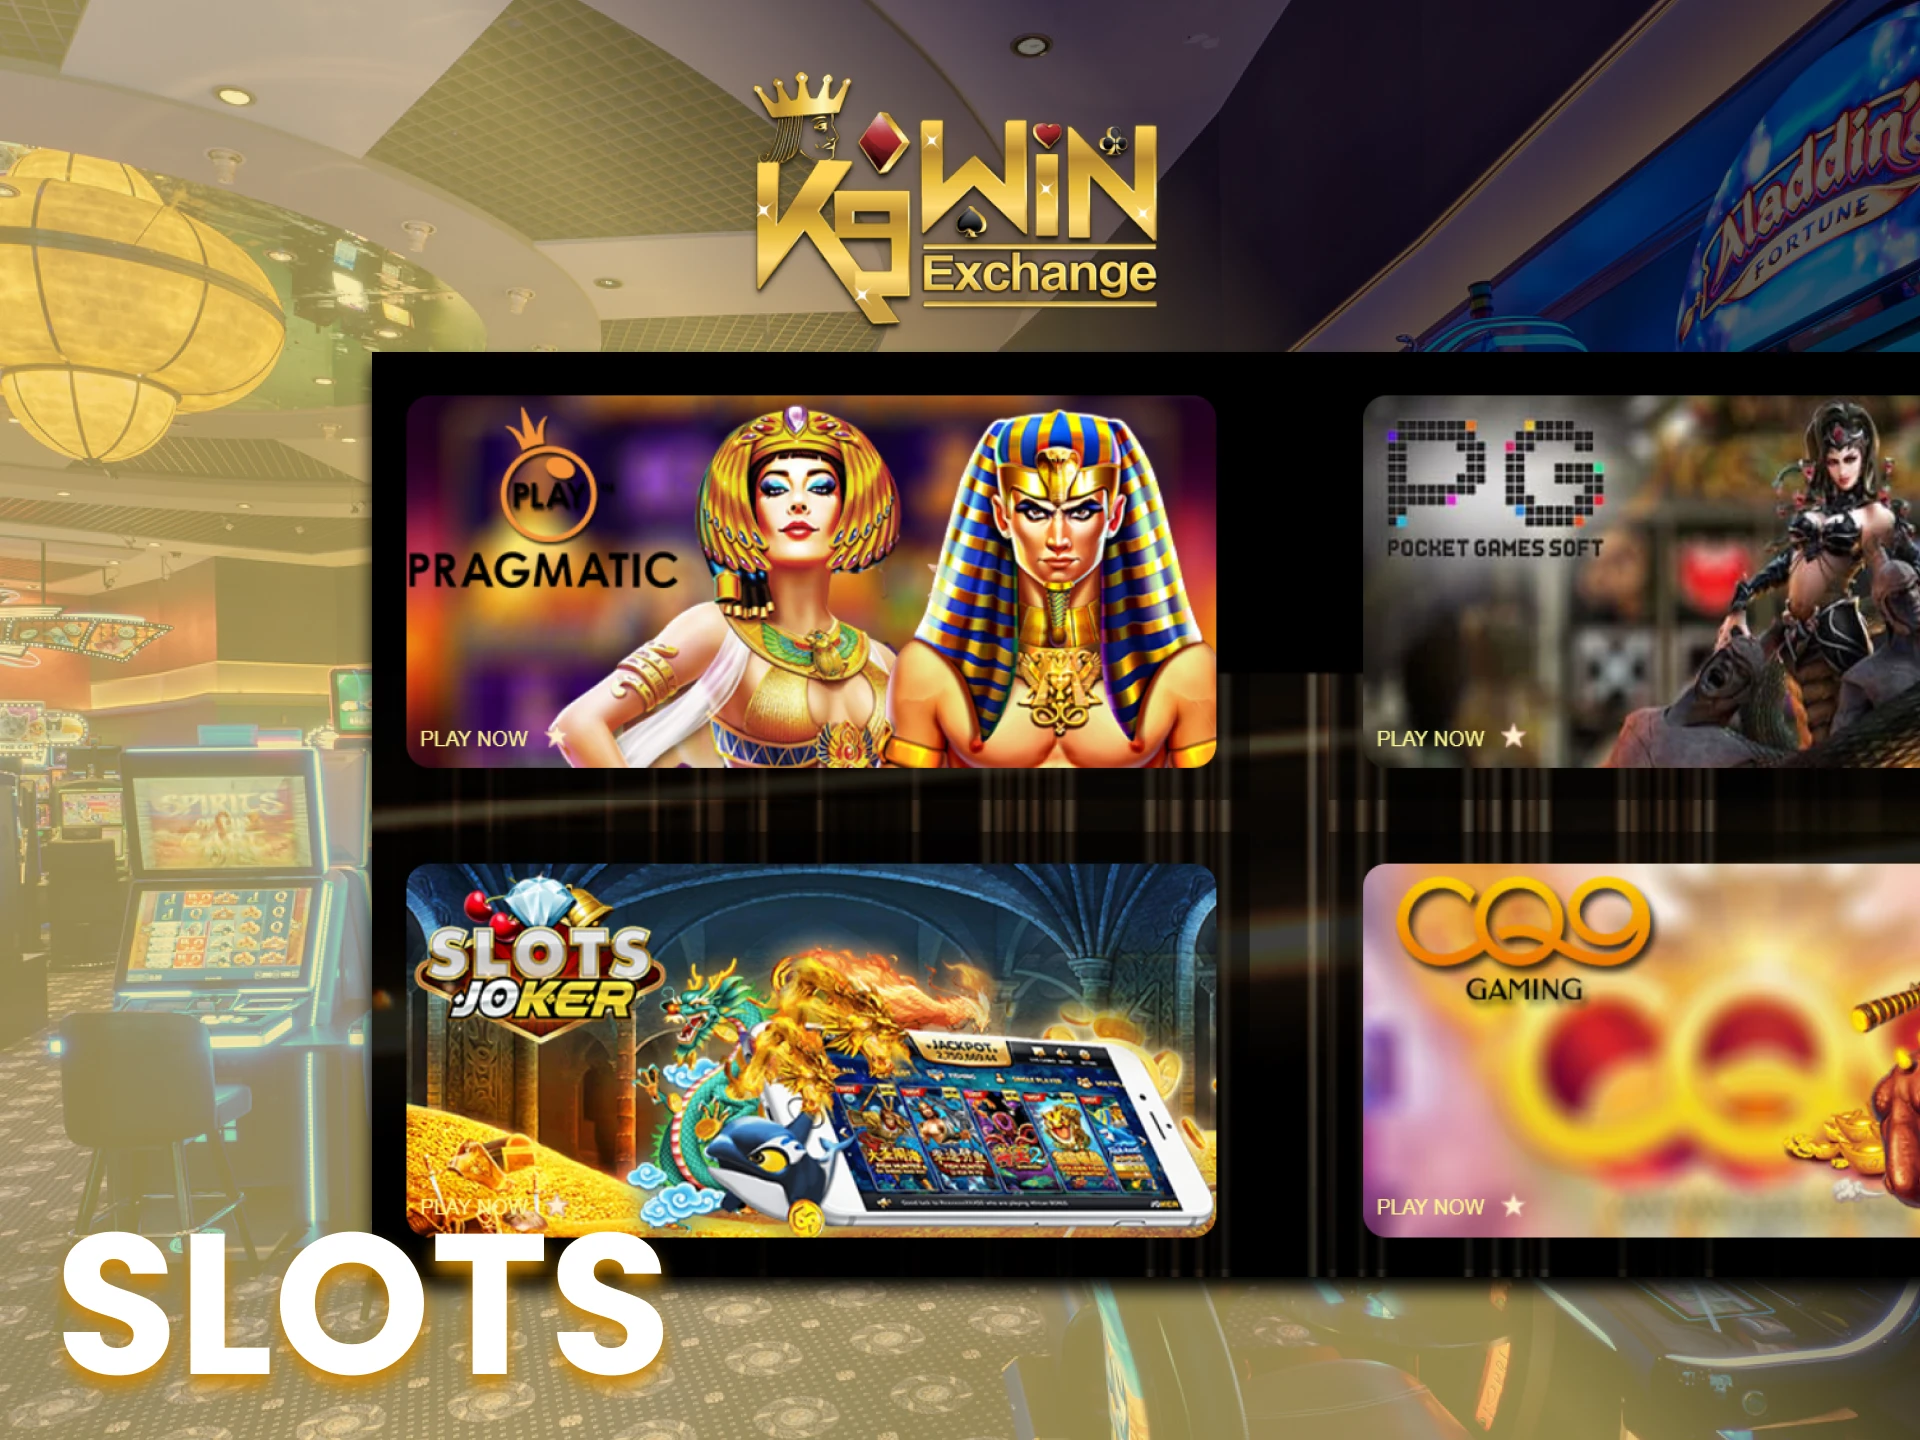 Search for your favourite slots at the K9Win casino.